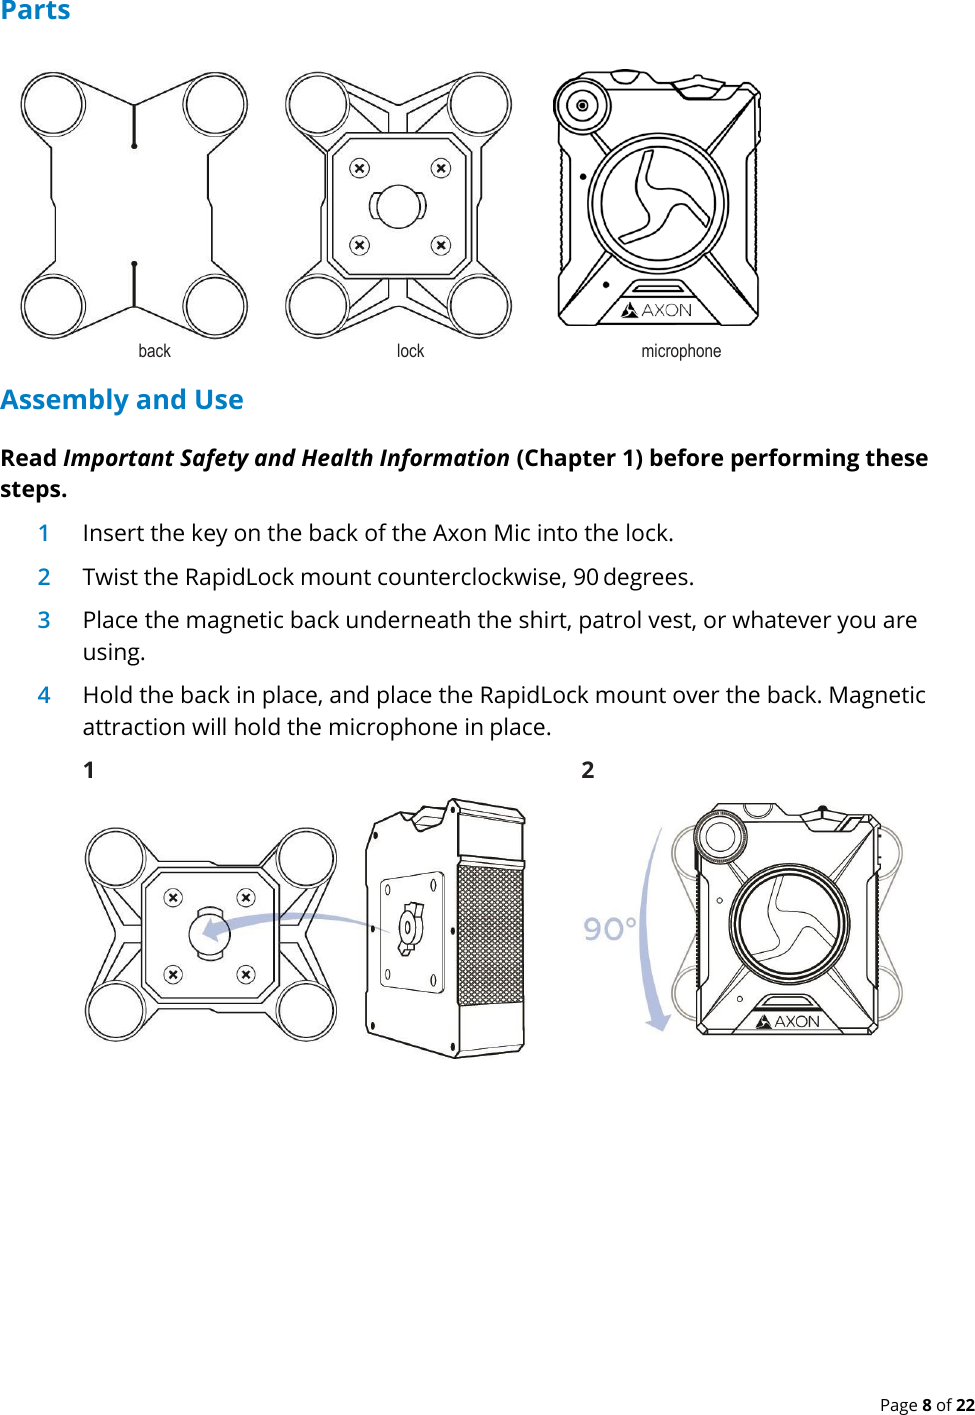  Page 8 of 22 Parts back  lock  microphone Assembly and Use Read Important Safety and Health Information (Chapter 1) before performing these steps. 1 Insert the key on the back of the Axon Mic into the lock. 2 Twist the RapidLock mount counterclockwise, 90 degrees. 3 Place the magnetic back underneath the shirt, patrol vest, or whatever you are using. 4 Hold the back in place, and place the RapidLock mount over the back. Magnetic attraction will hold the microphone in place. 1  2  